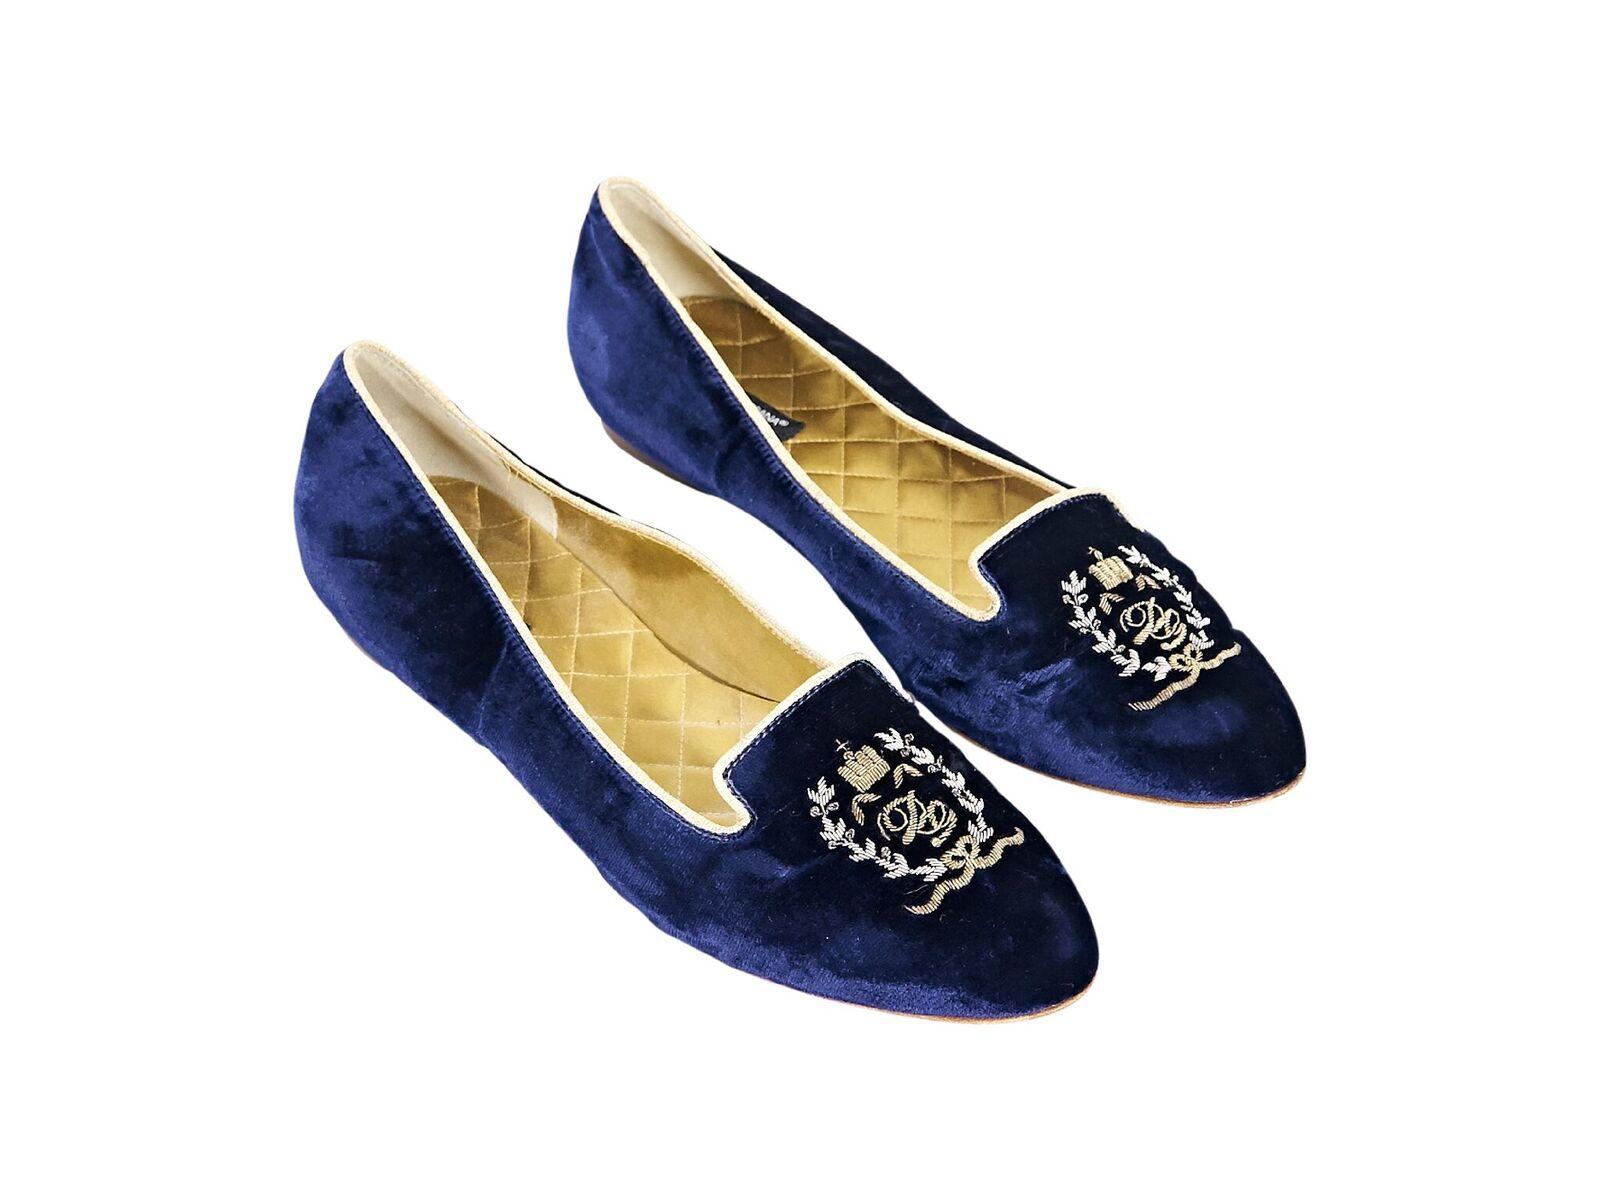 Product details:  Blue velvet smoking slippers by Dolce & Gabbana.  Embroidered vamp detail.  Slip-on style. 
Condition: Pre-owned. Very good.
